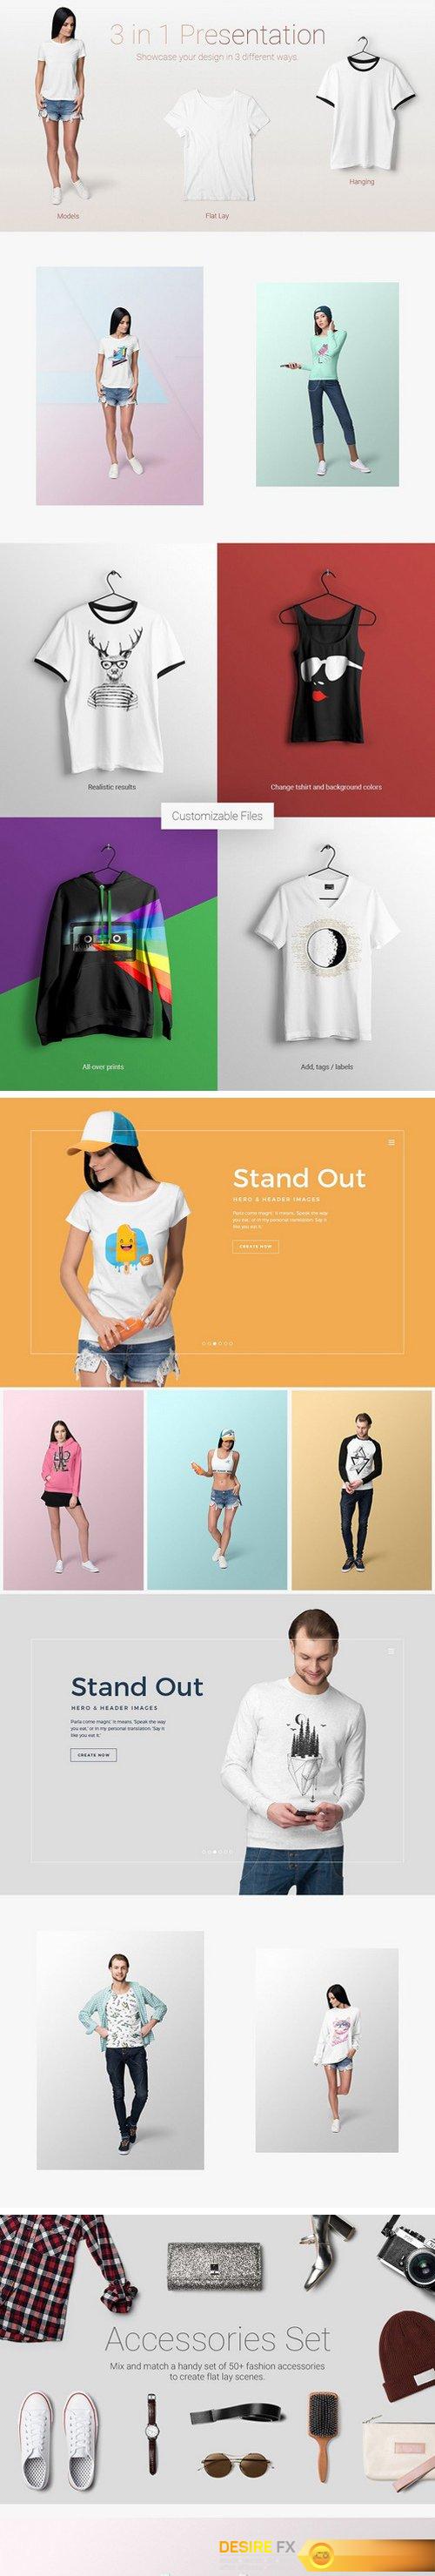 1508705887_ultimate-apparel-mockup-collection-1575498gfx_02